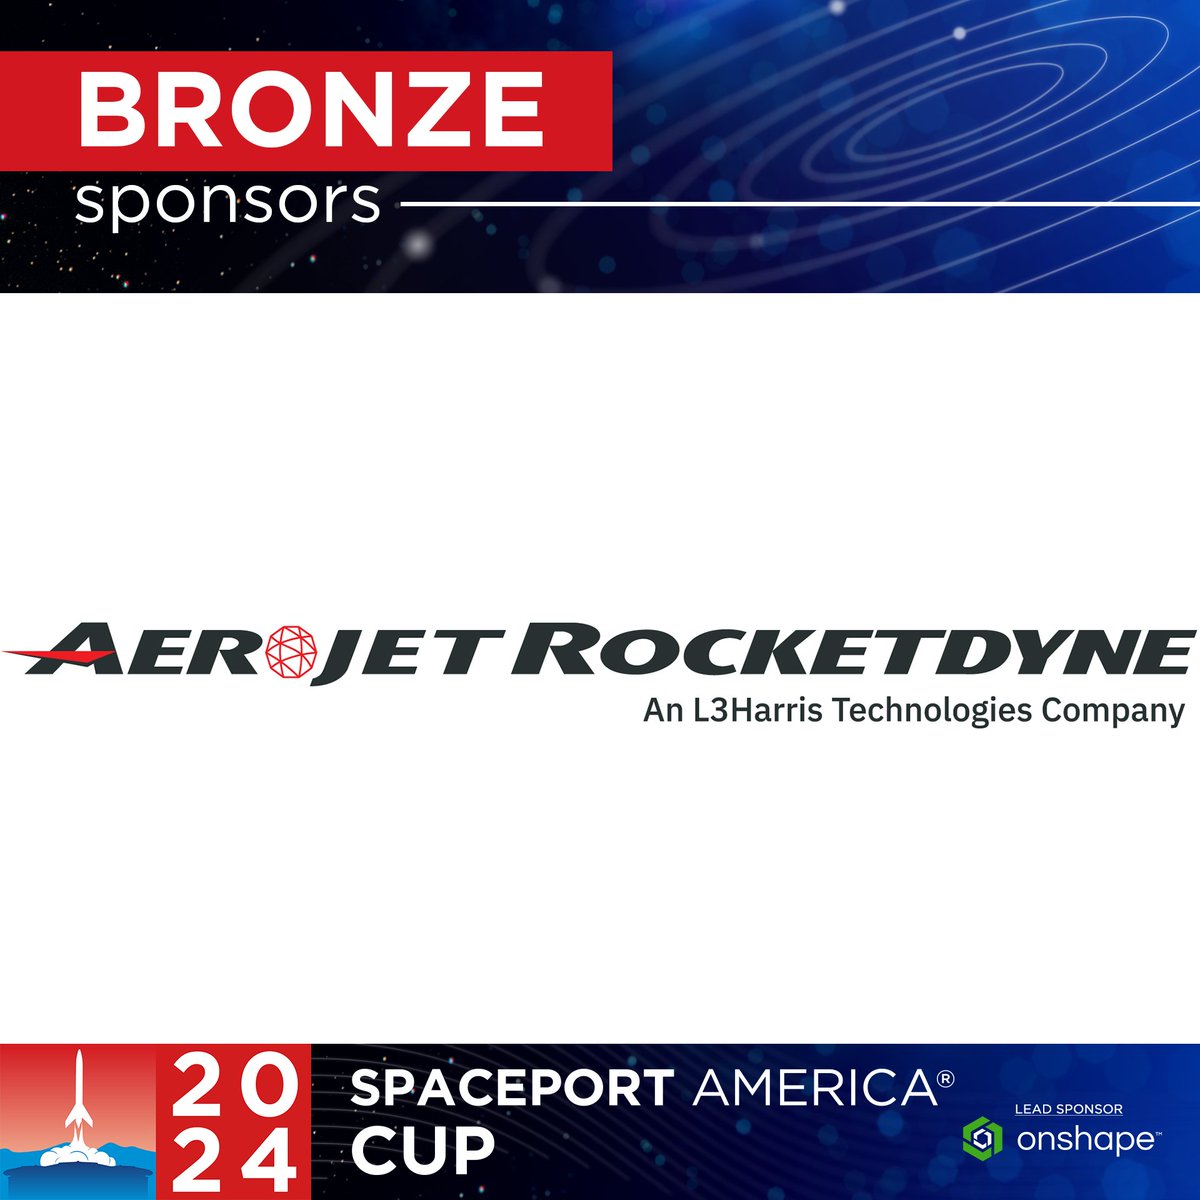 Great to have one of the best propulsion systems developers & manufactures on board 🚀 An @L3HarrisTech company, Aerojet Rocketdyne provides a full range of propulsion and power systems for rockets, spacecraft and other space vehicles ✨ Learn more | bit.ly/3xg820X